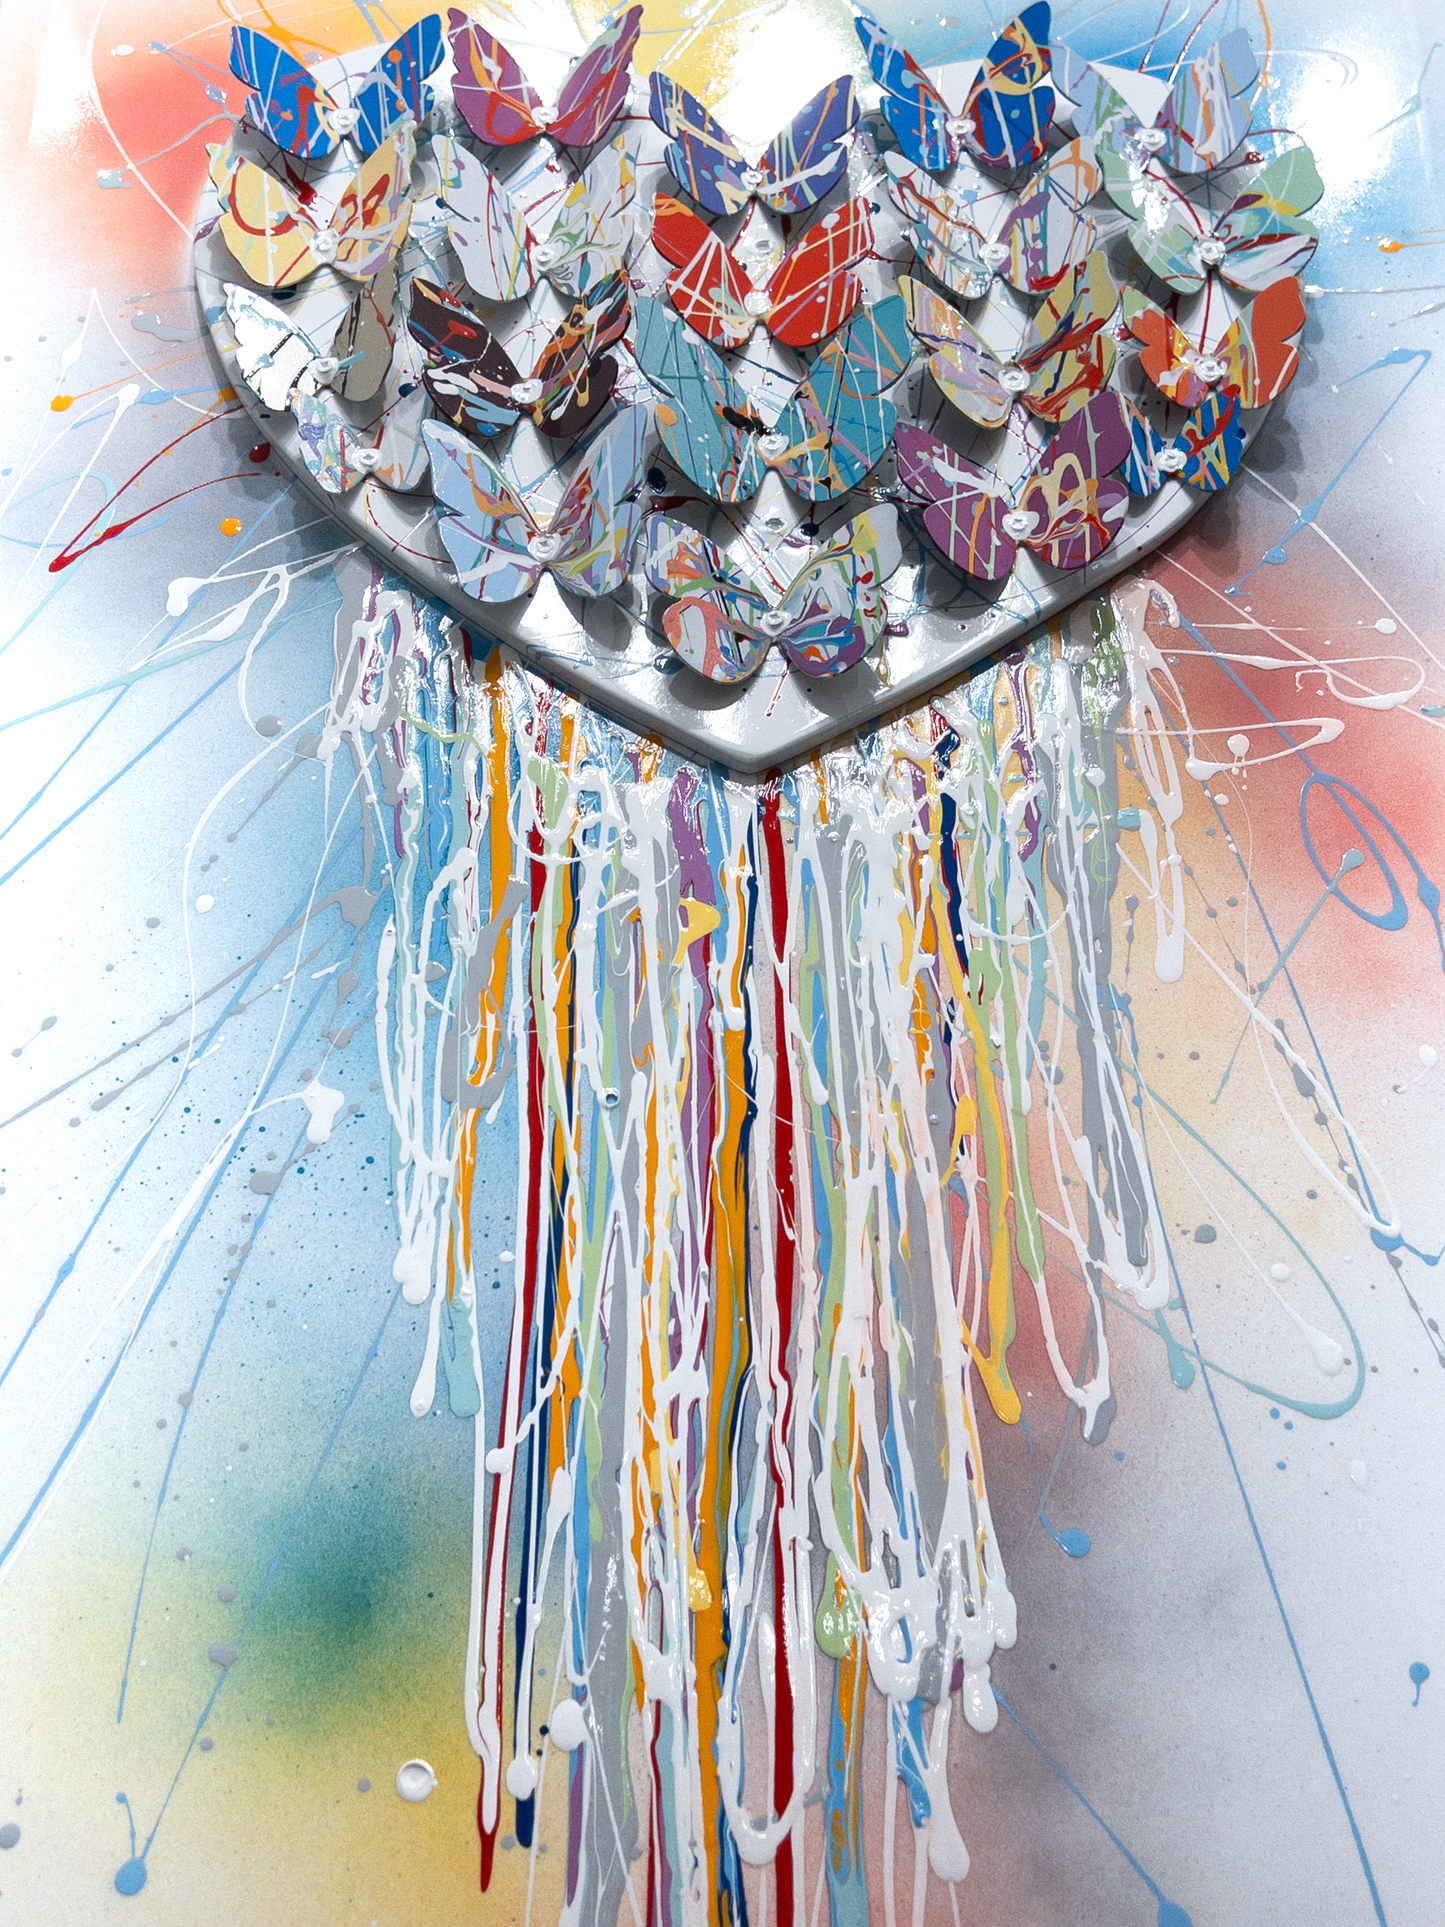 Closeup view of Framed Dripping Colorful Heart artwork